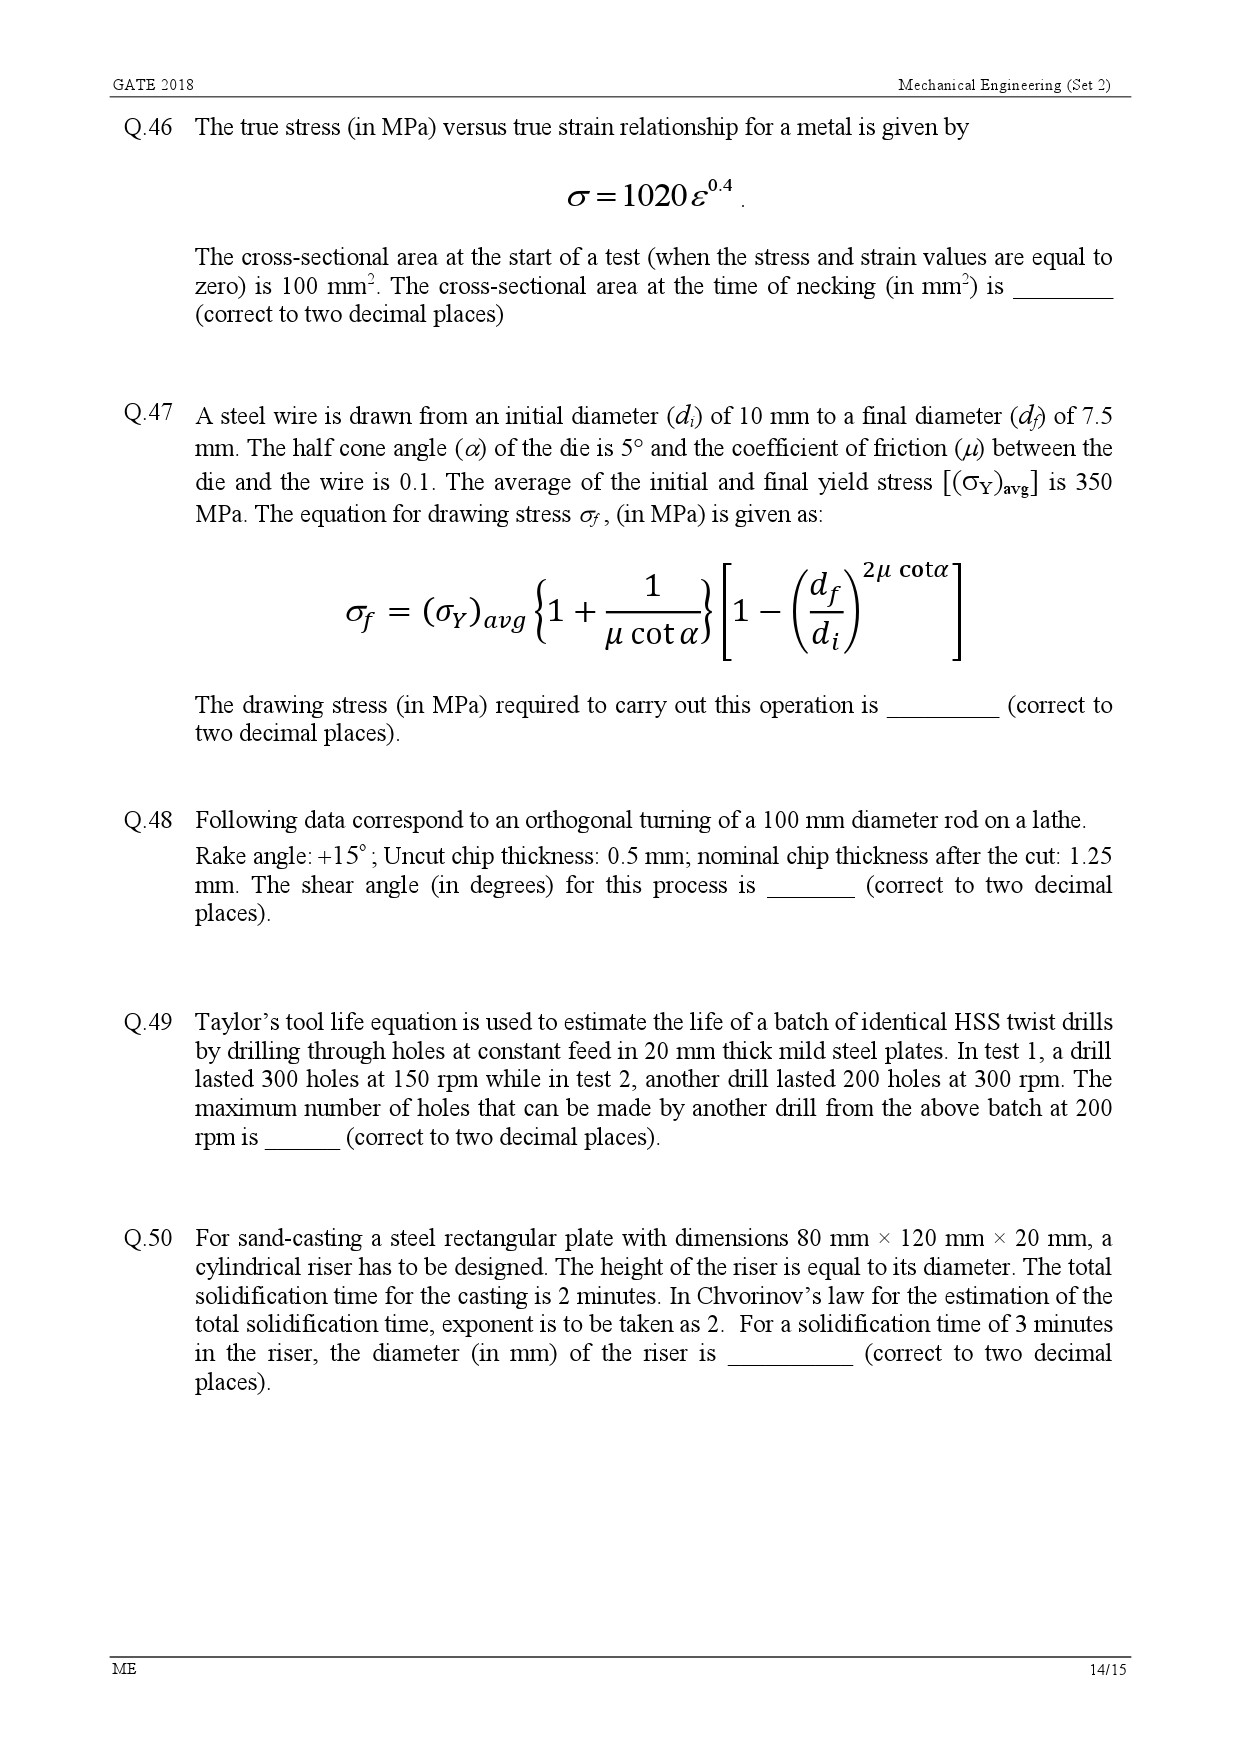 GATE Exam Question Paper 2018 Mechanical Engineering Set 2 17